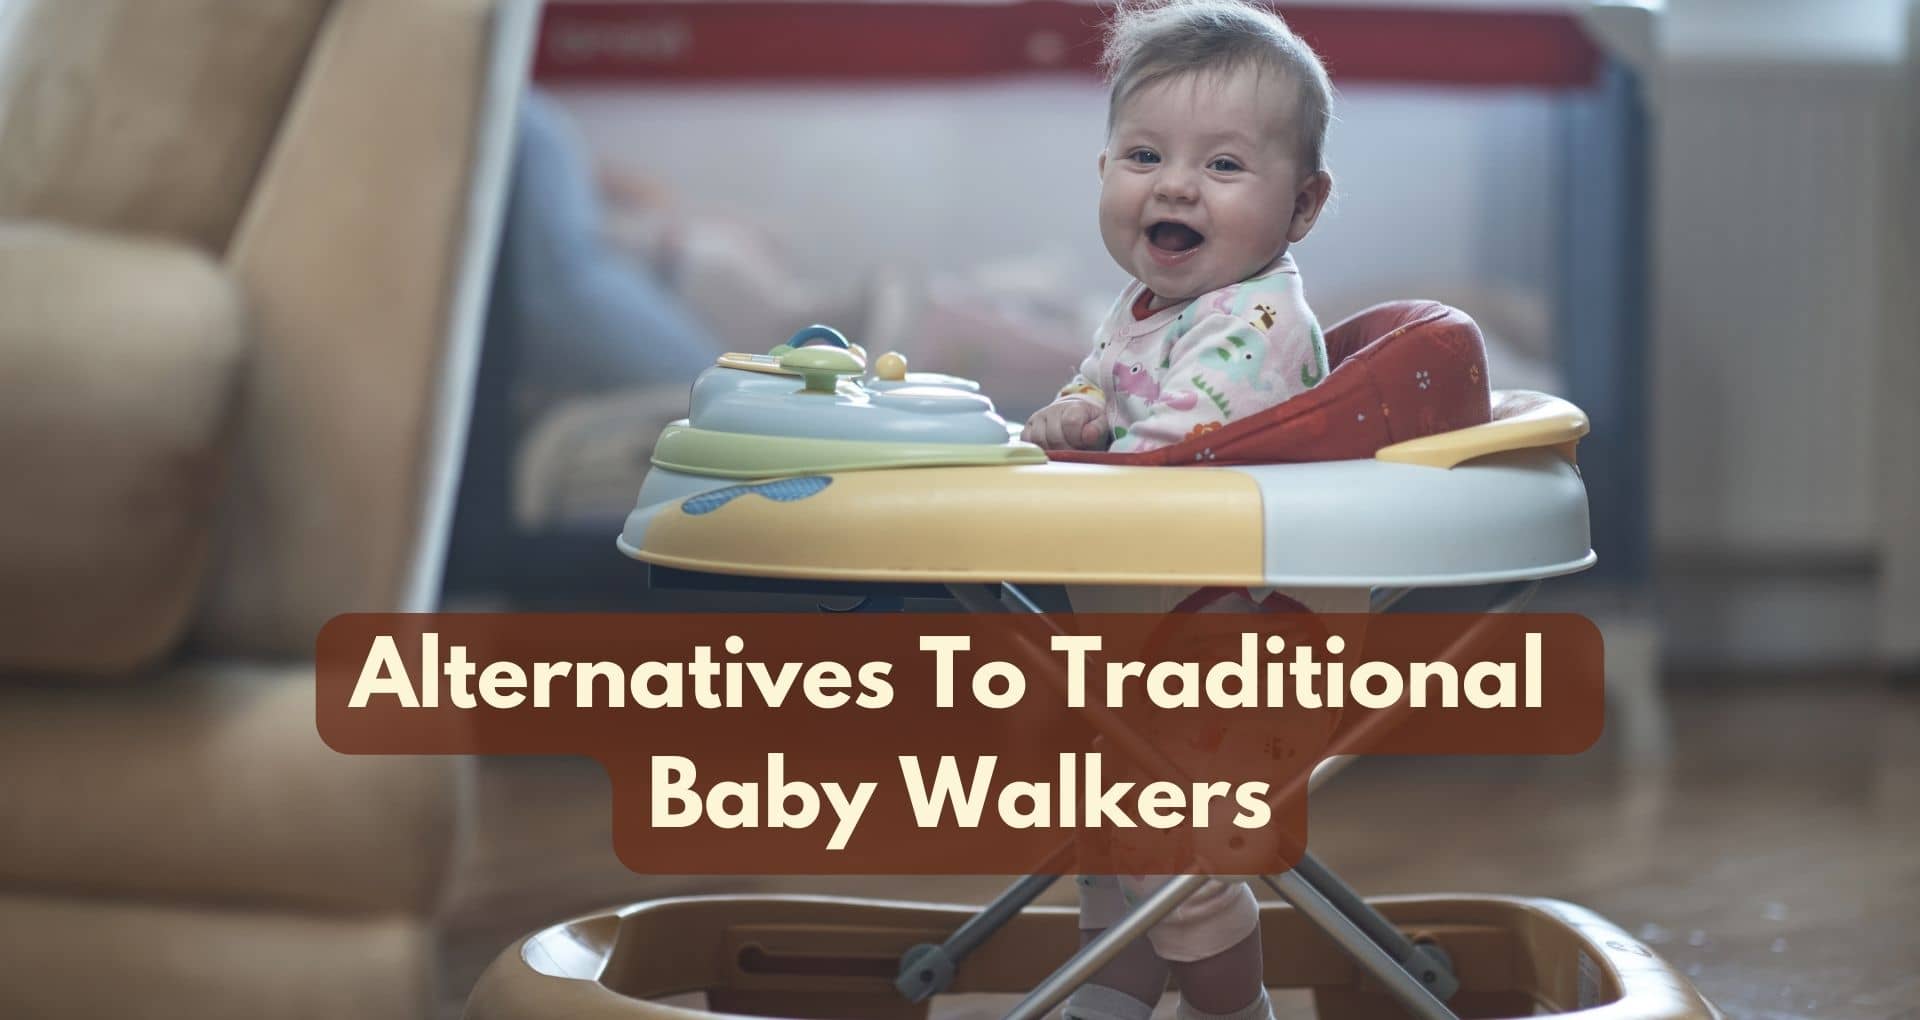 What Are Some Alternatives To Traditional Baby Walkers?